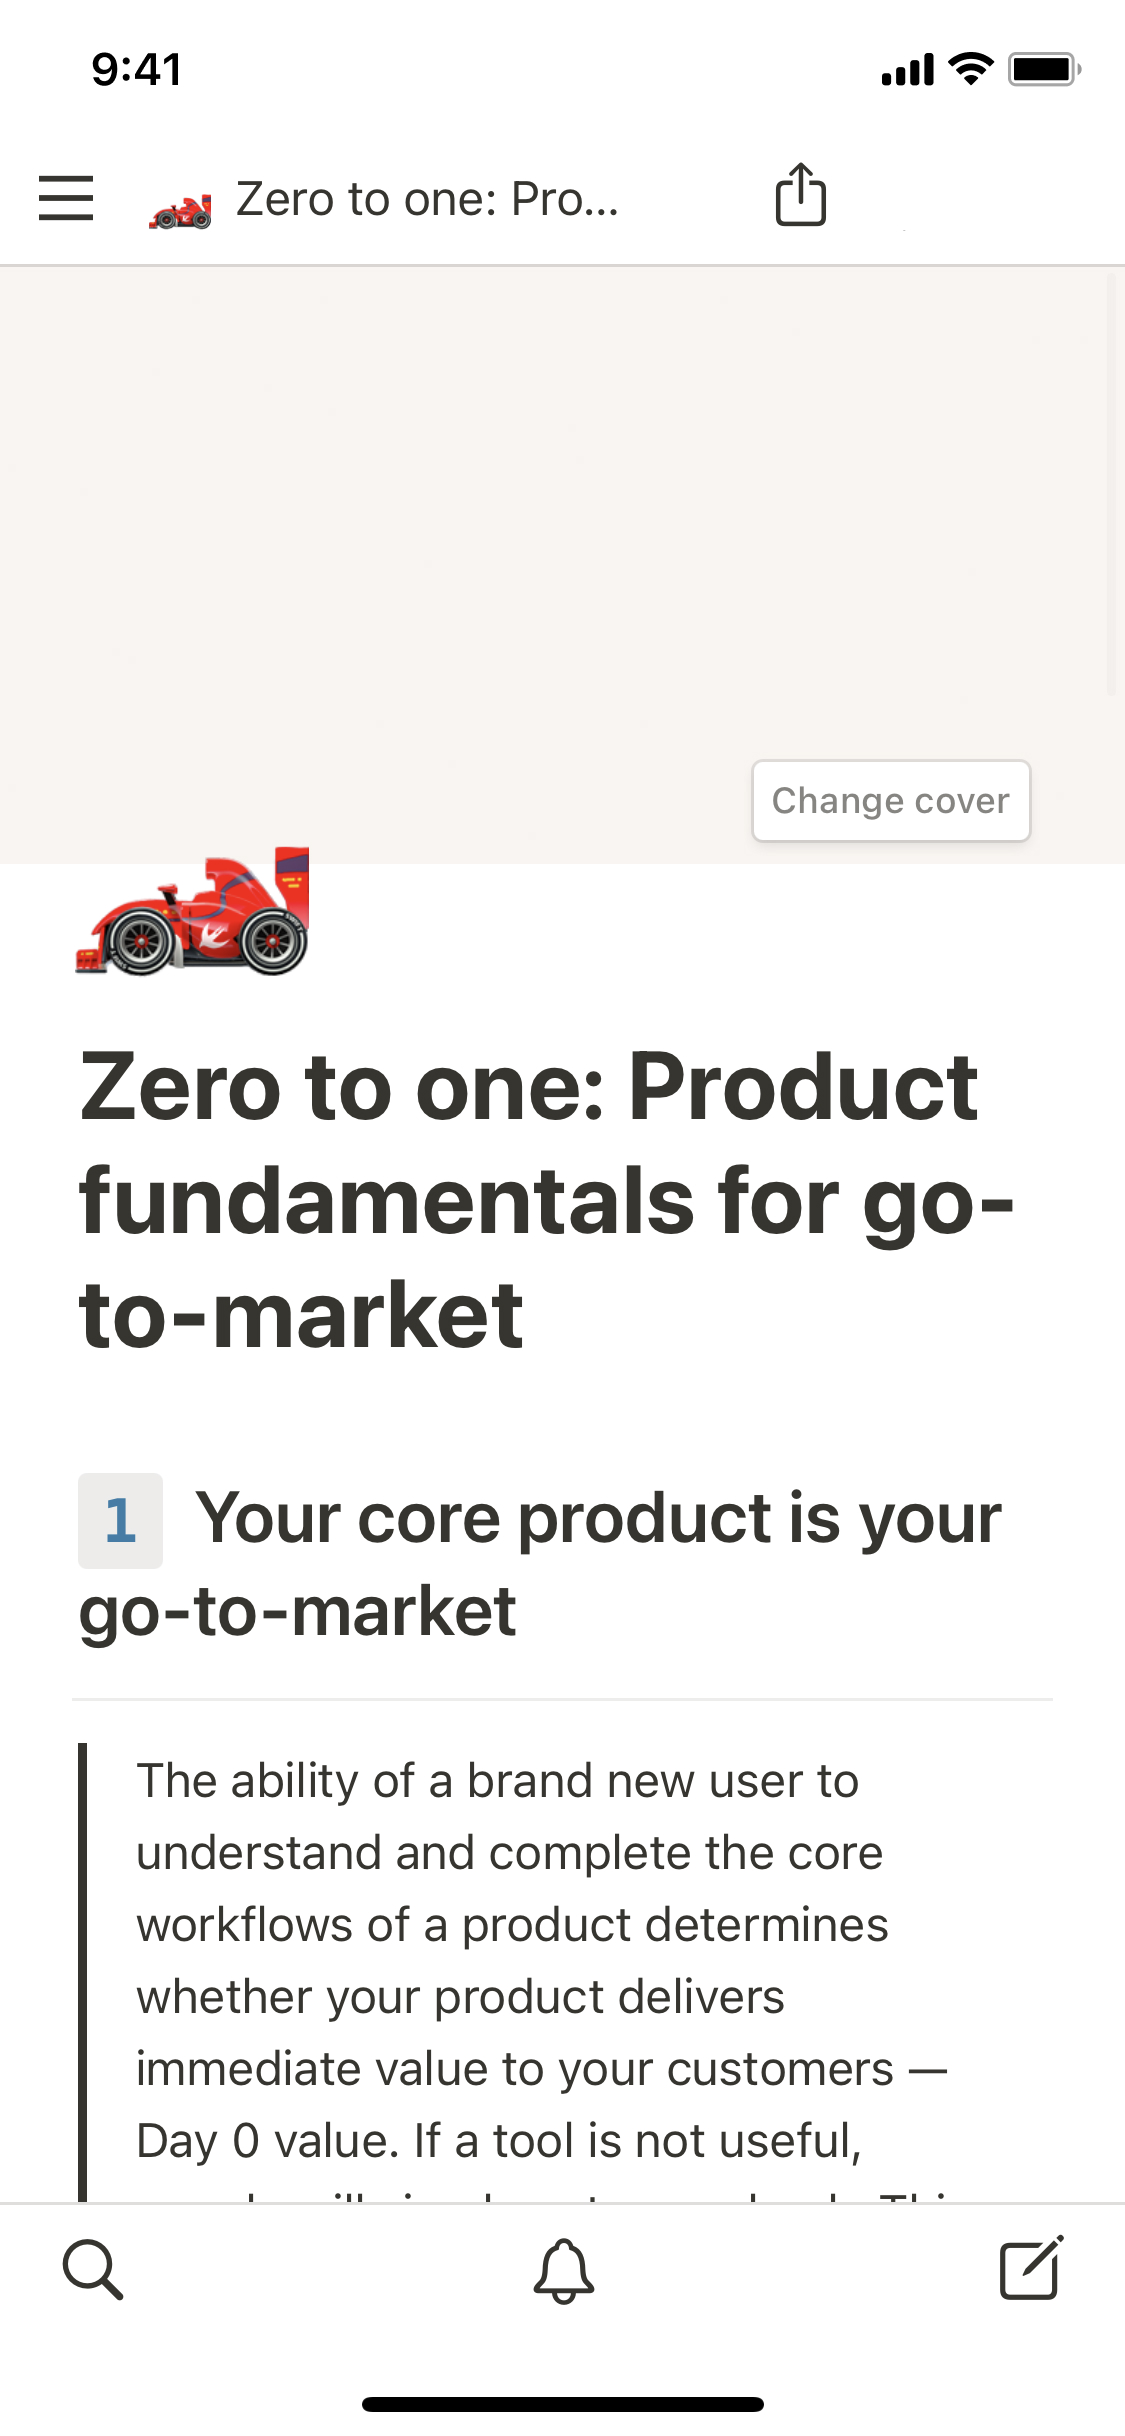 The mobile image for the Merci Grace's zero to one framework template